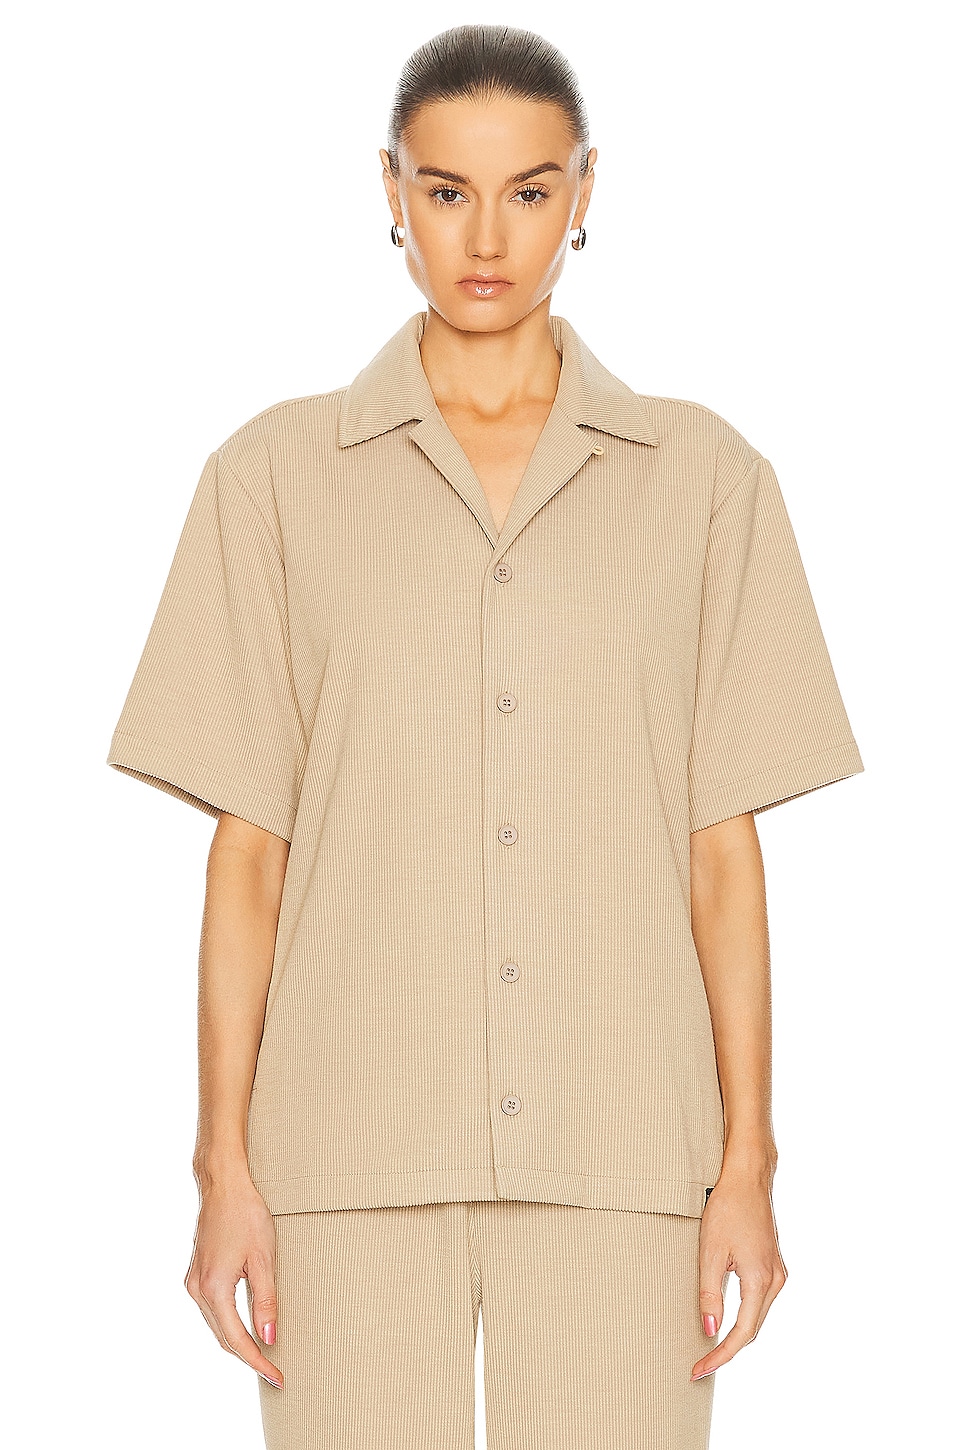 Ribbed Knit Camp Shirt in Beige